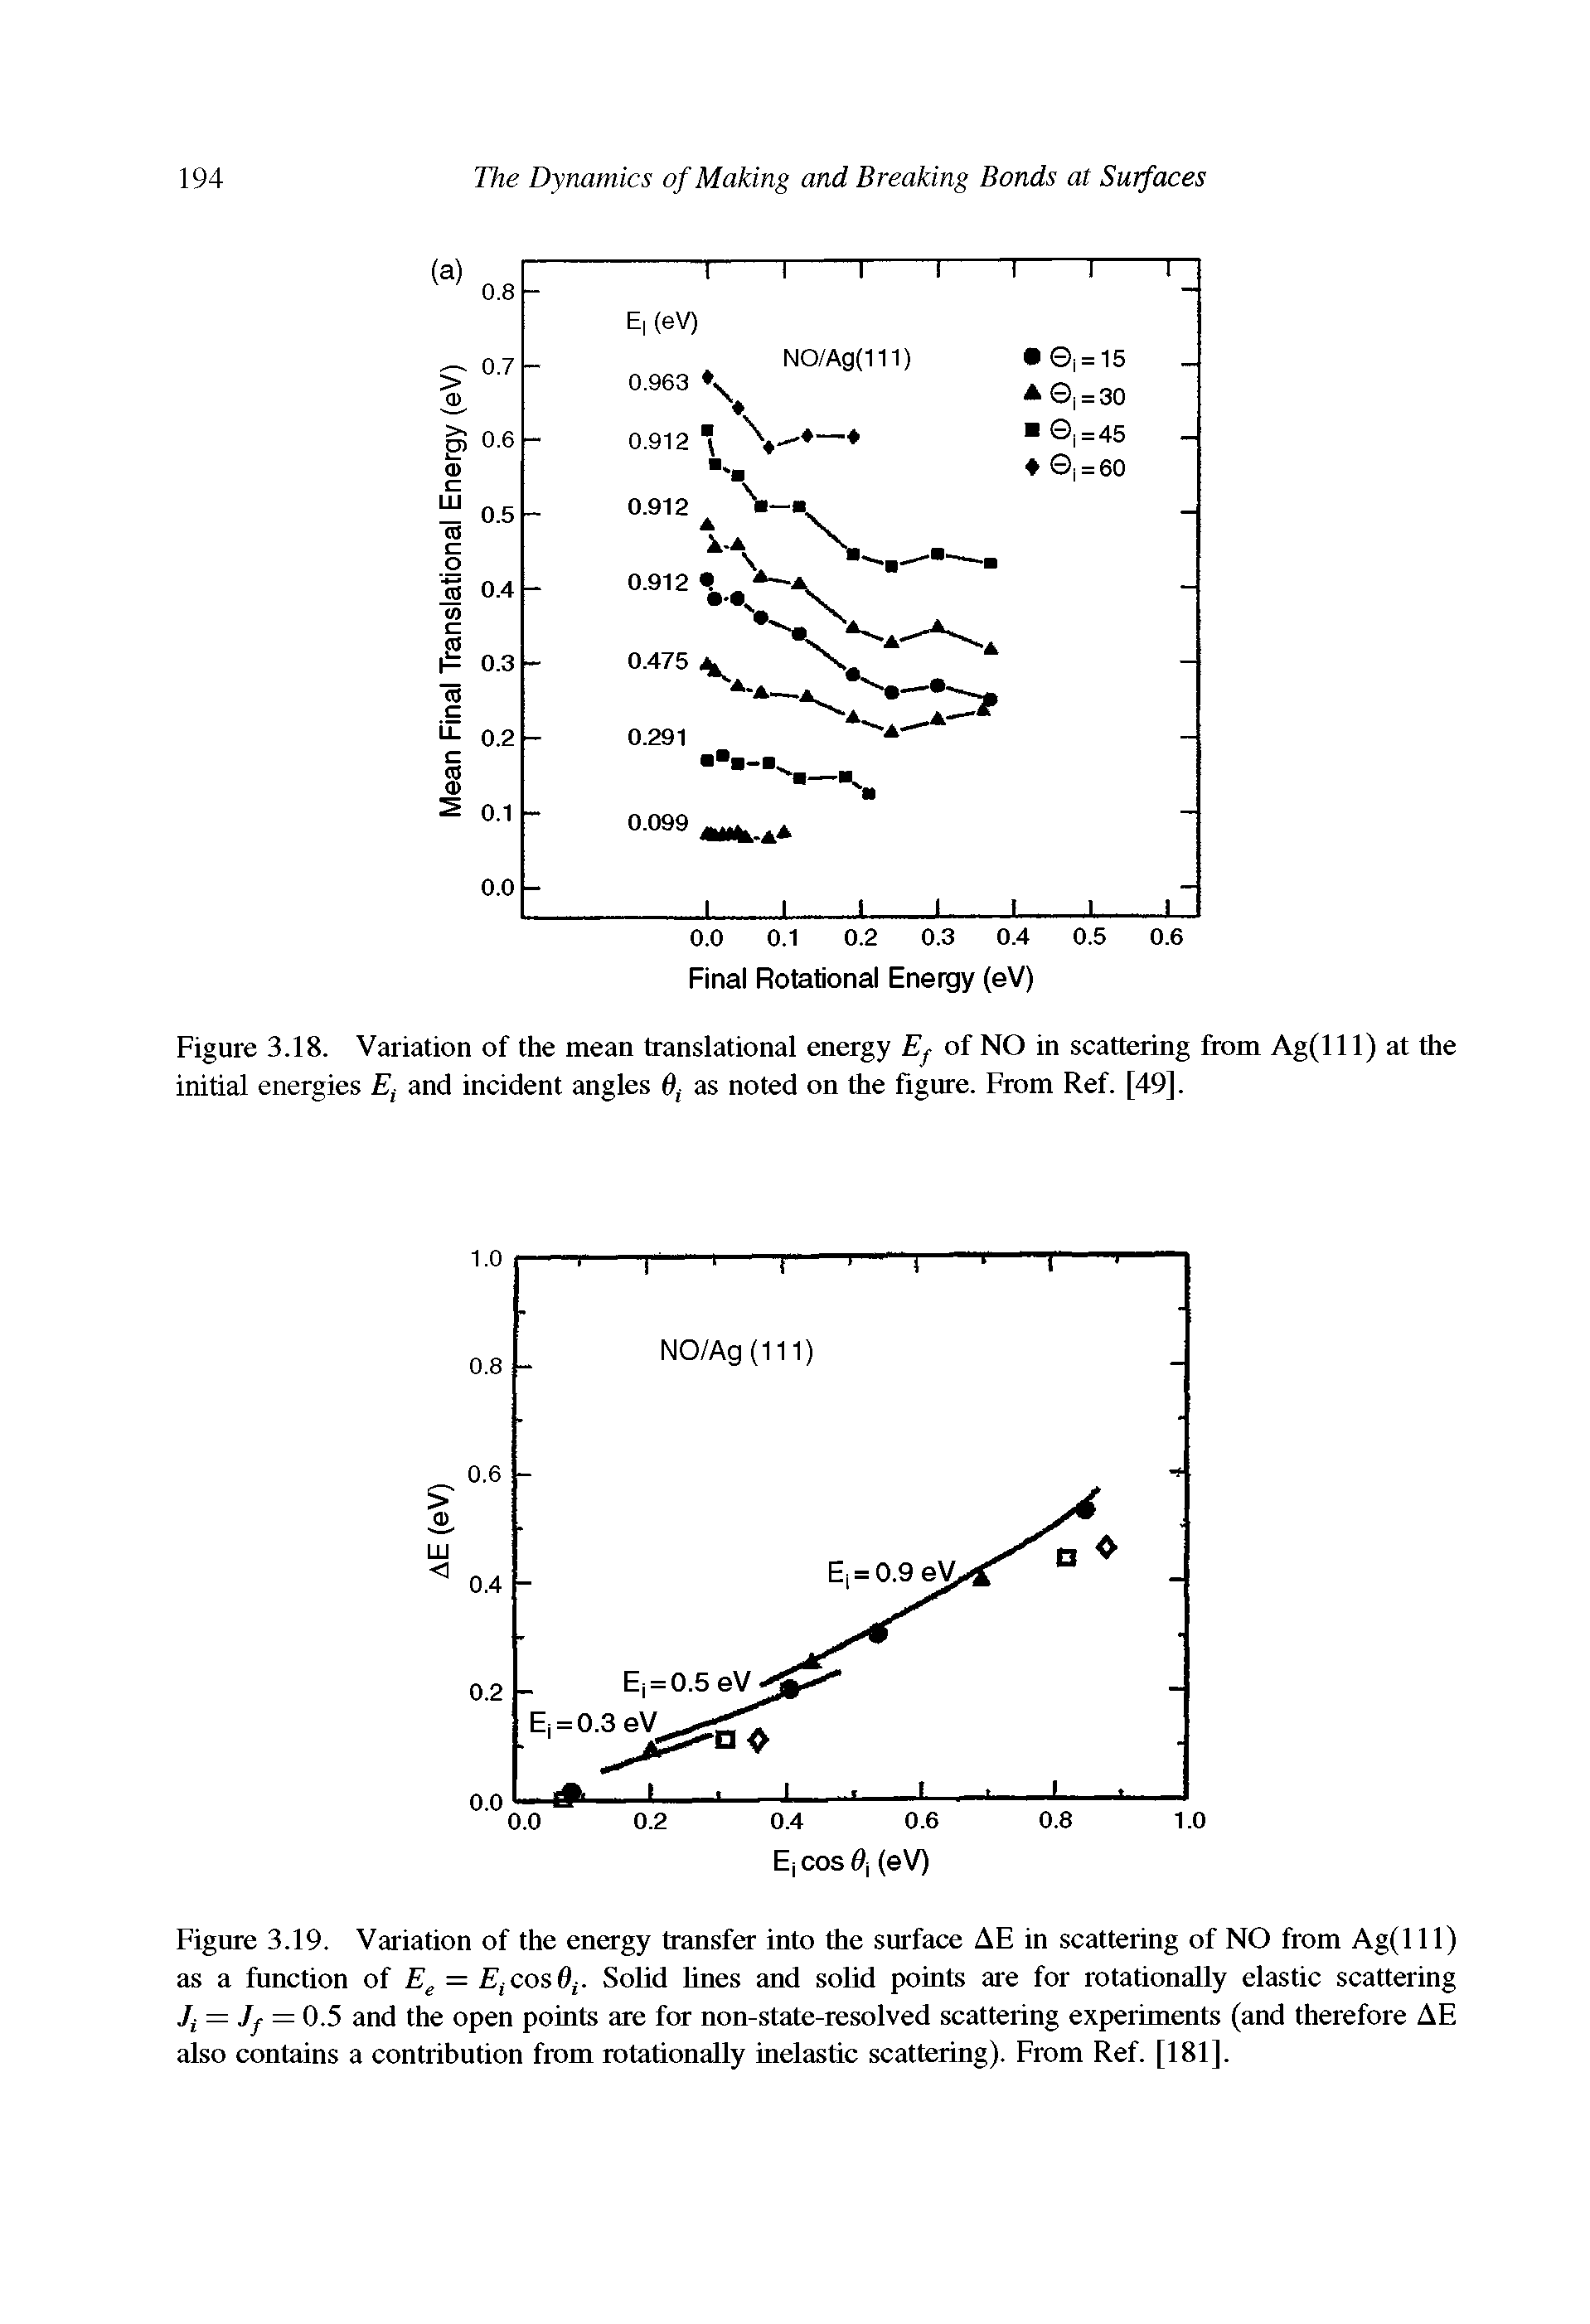 Figure 3.18. Variation of the mean translational energy Ef of NO in scattering from Ag(lll) at the initial energies Et and incident angles 0f as noted on the figure. From Ref. [49].